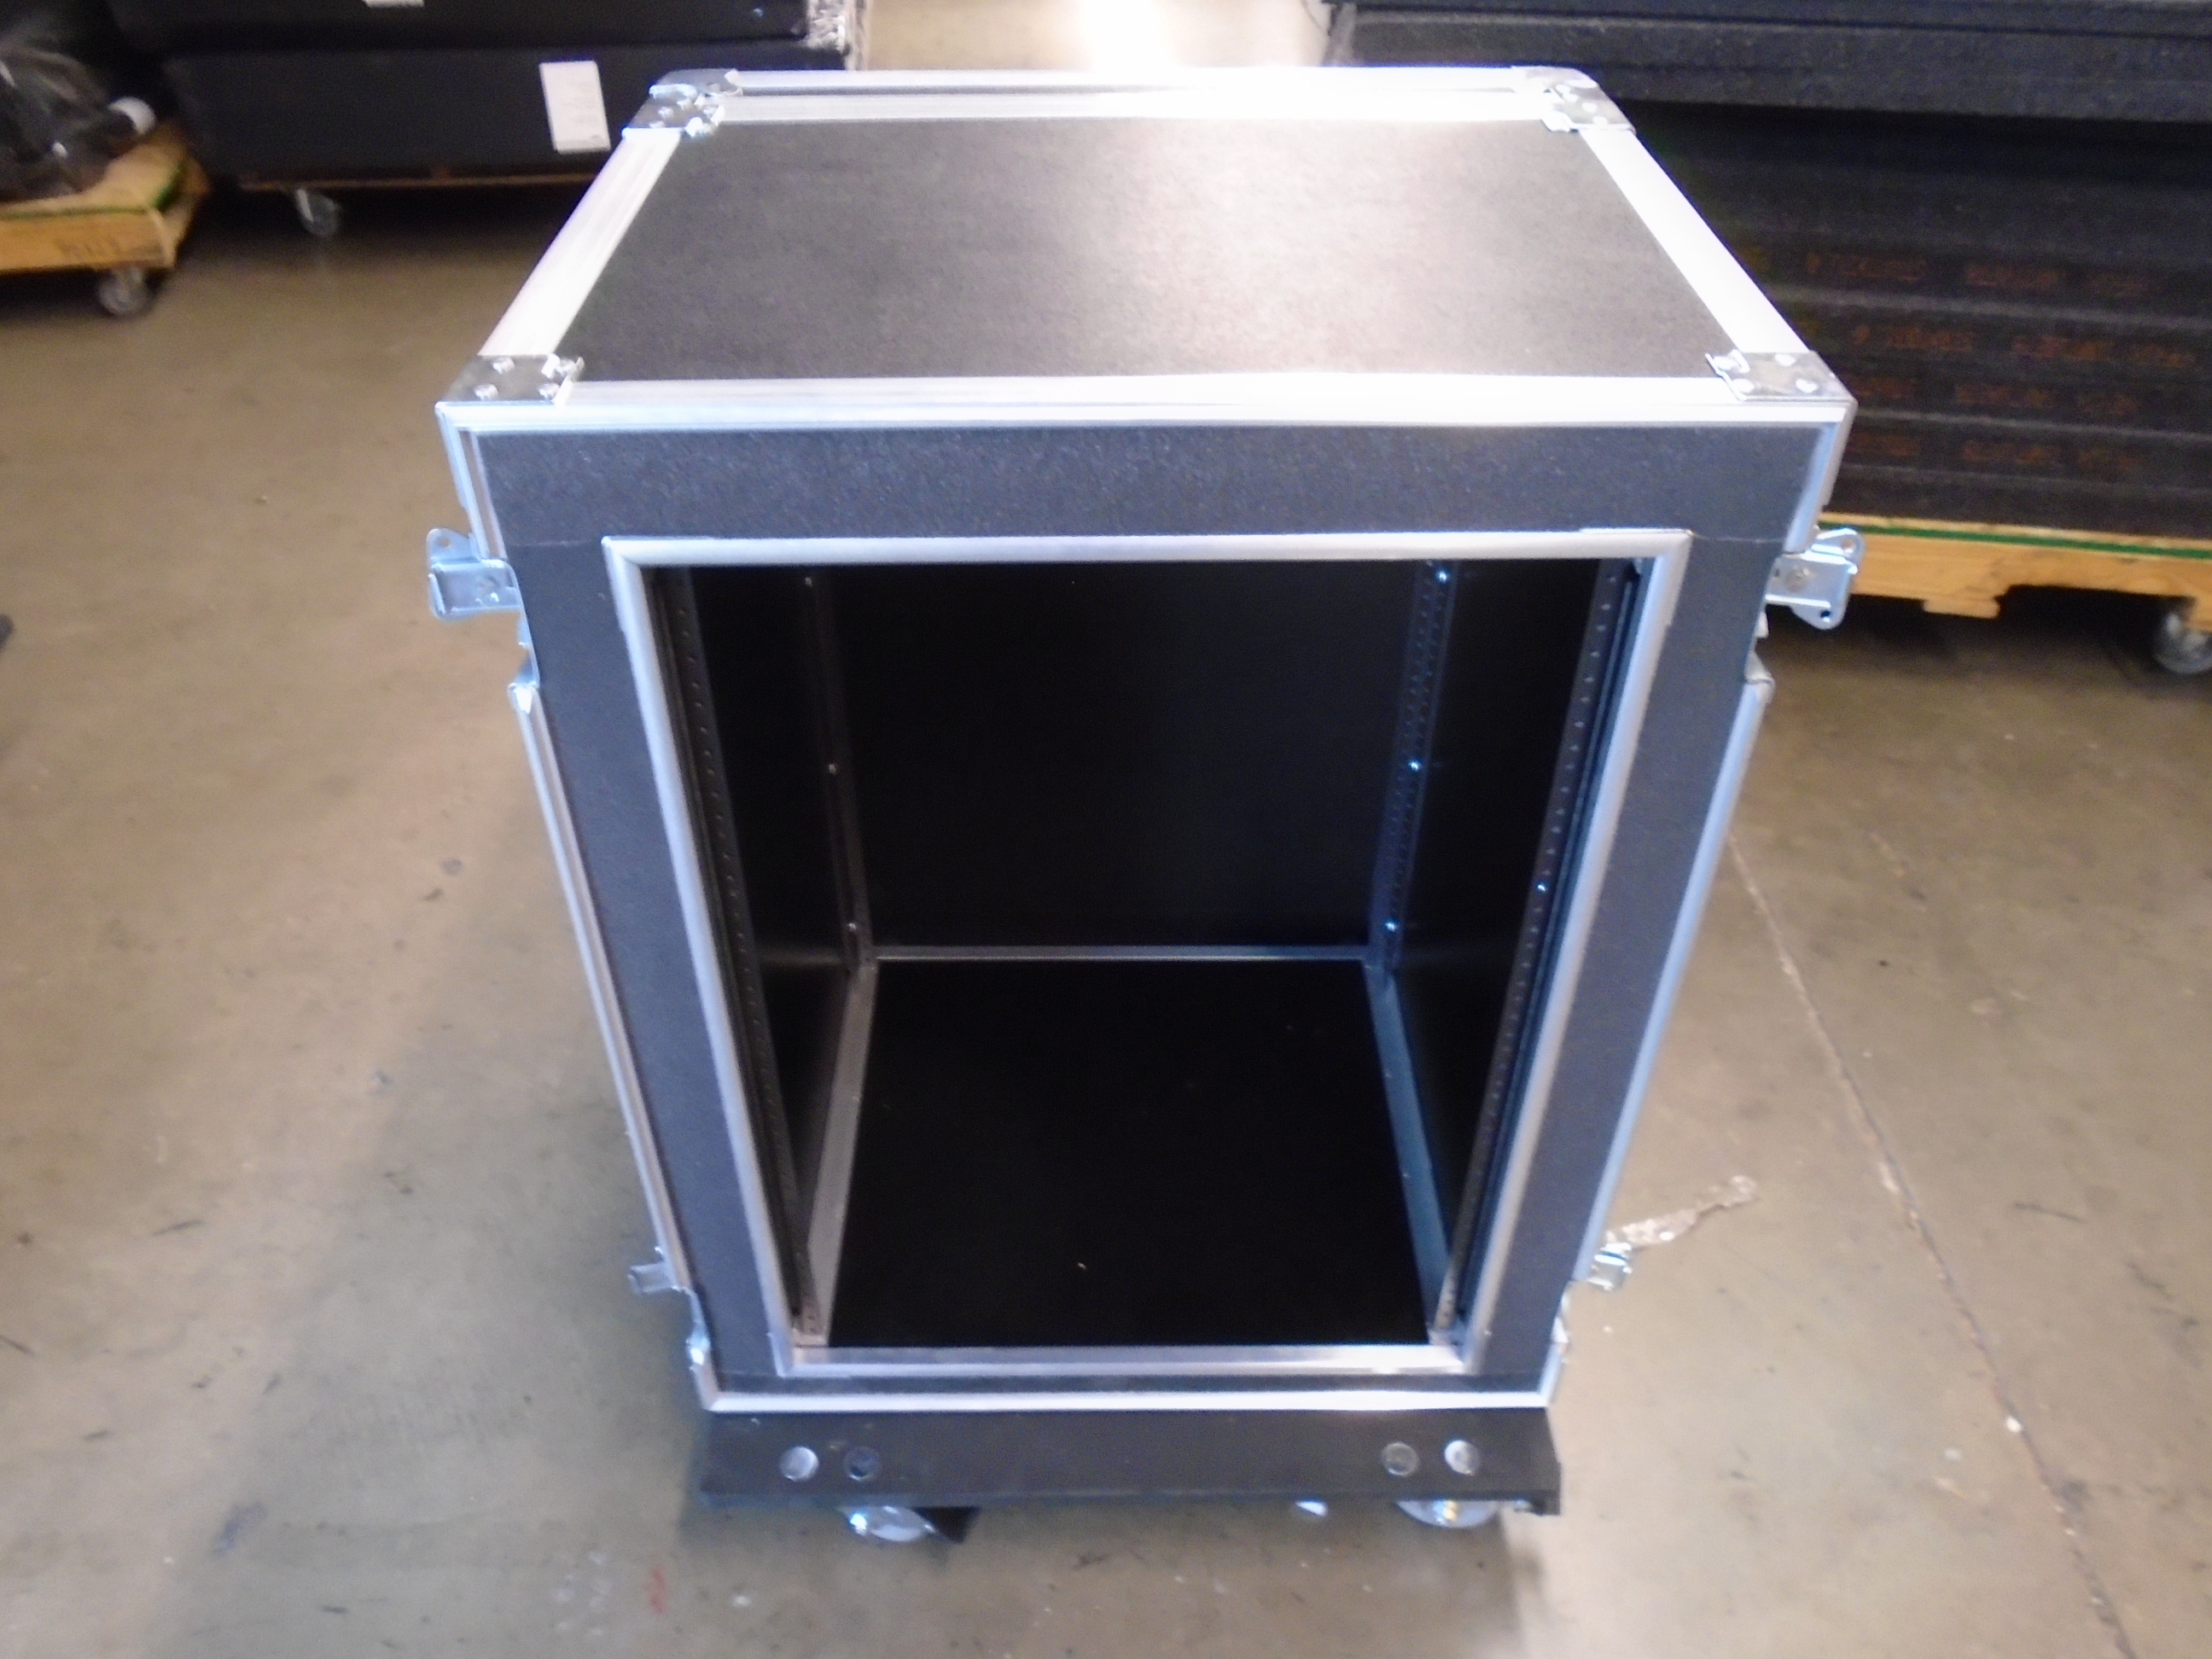 Print # 7057 - Custom 15RU Shock Rack Case with 6RU Hatch on rear lid (as per customers specifications) By Nelson Case Corp